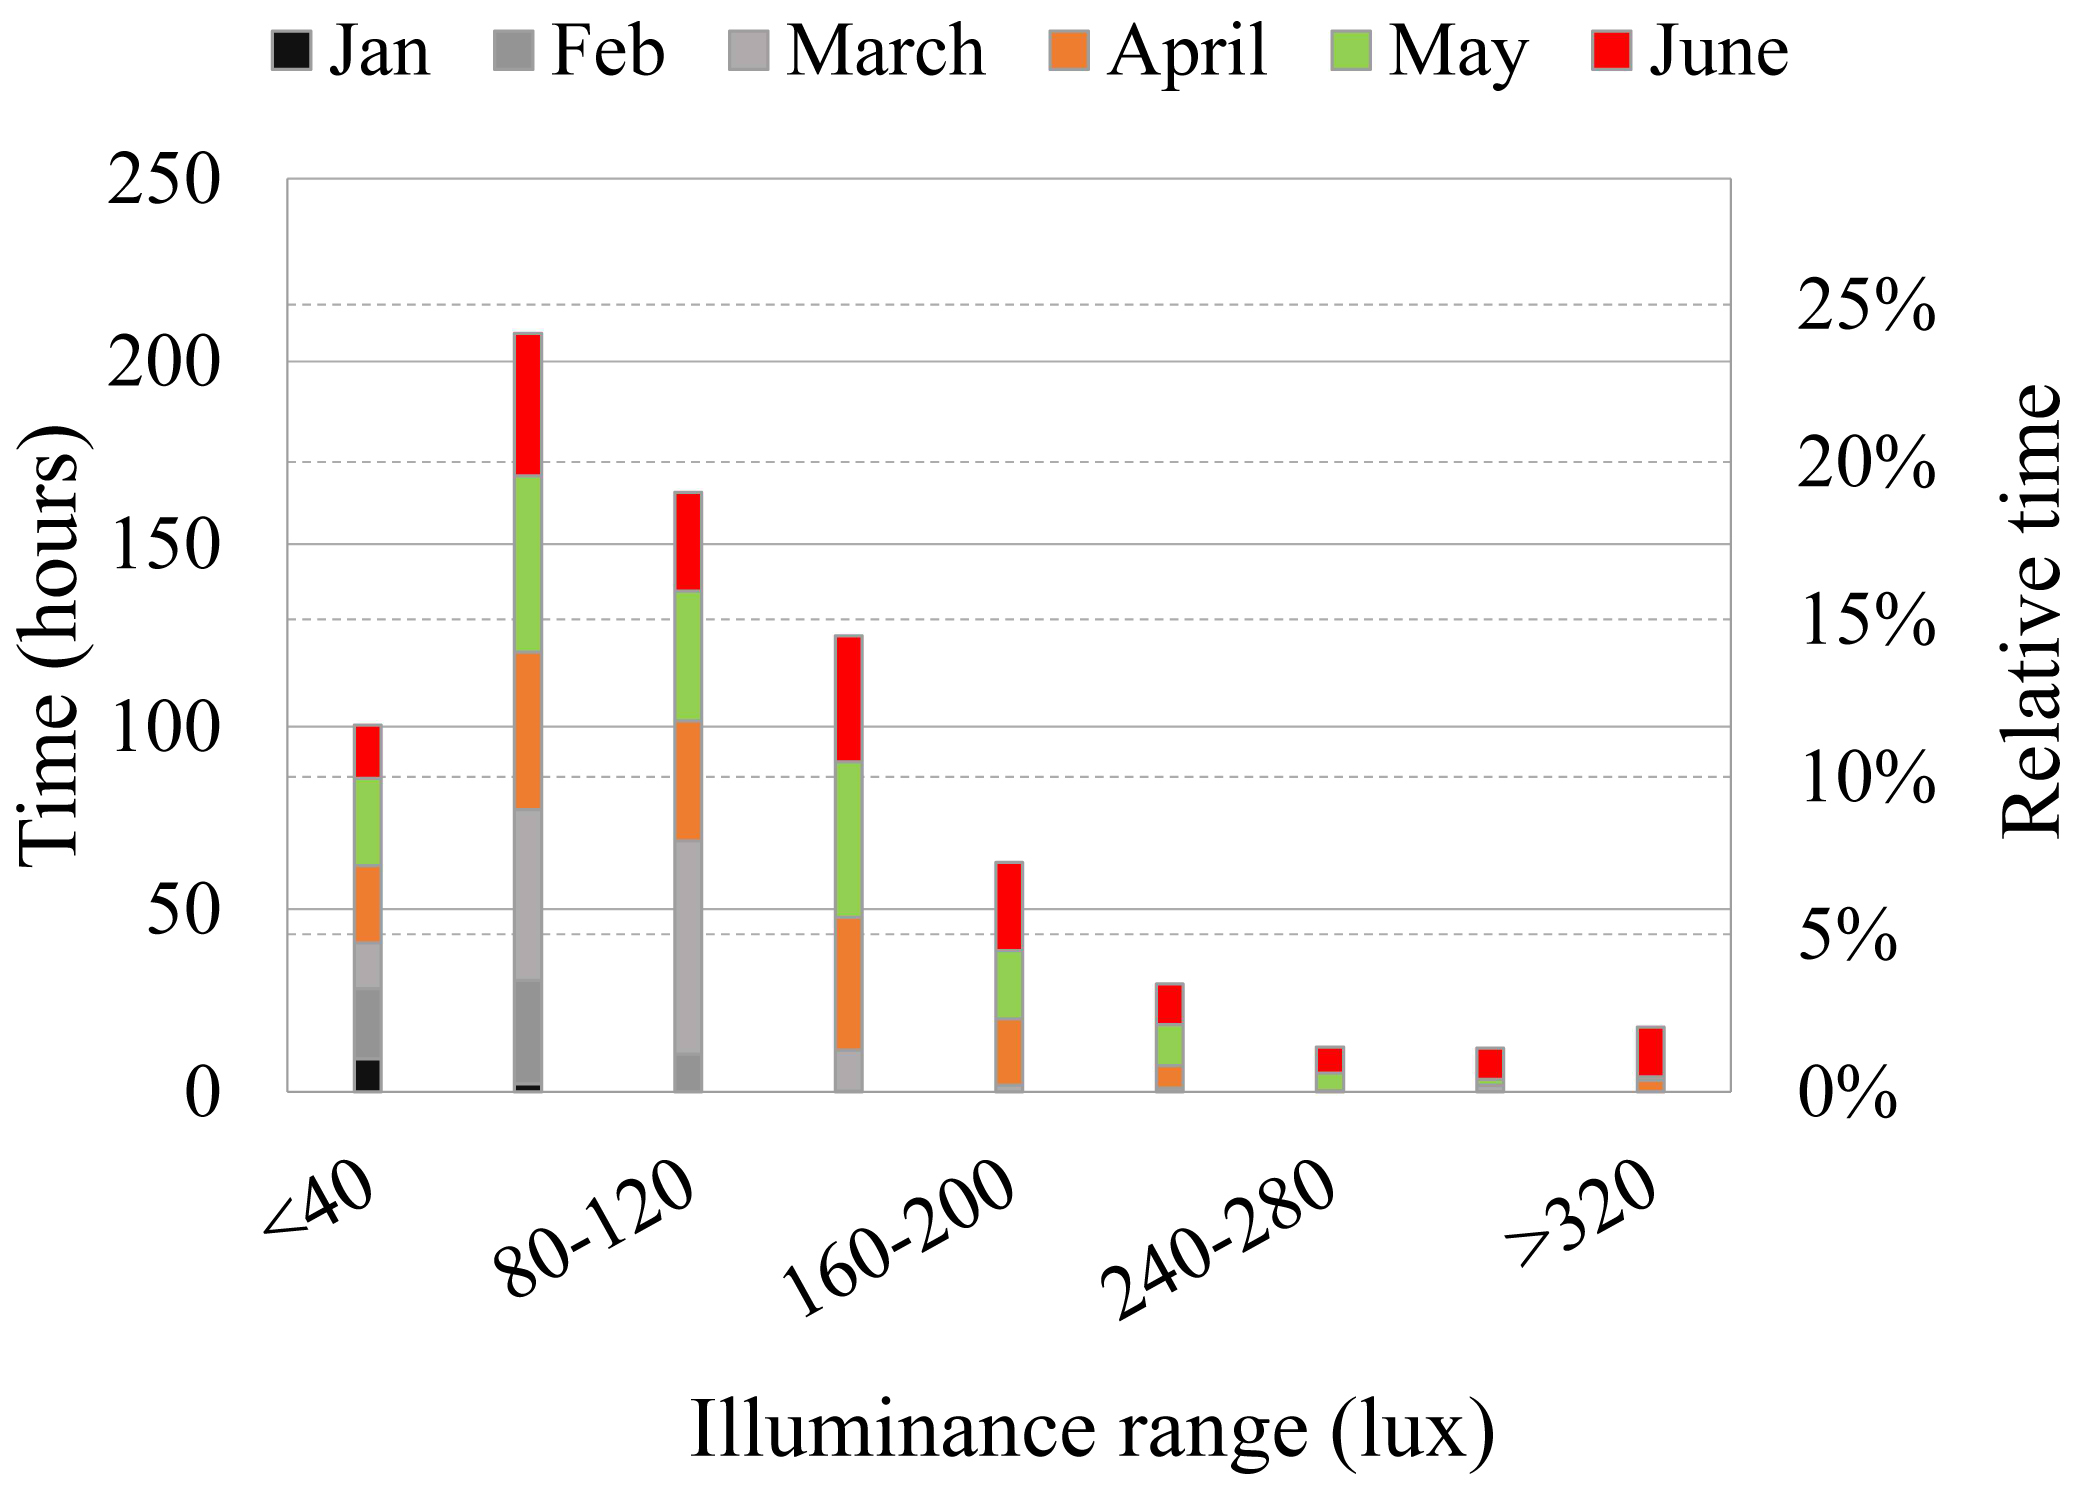 Daylight illuminance frequency distribution at 0.7 m above floor level, based on measured data from sensor v1, in house 1, between 08.00-16.00 hours during January to June.